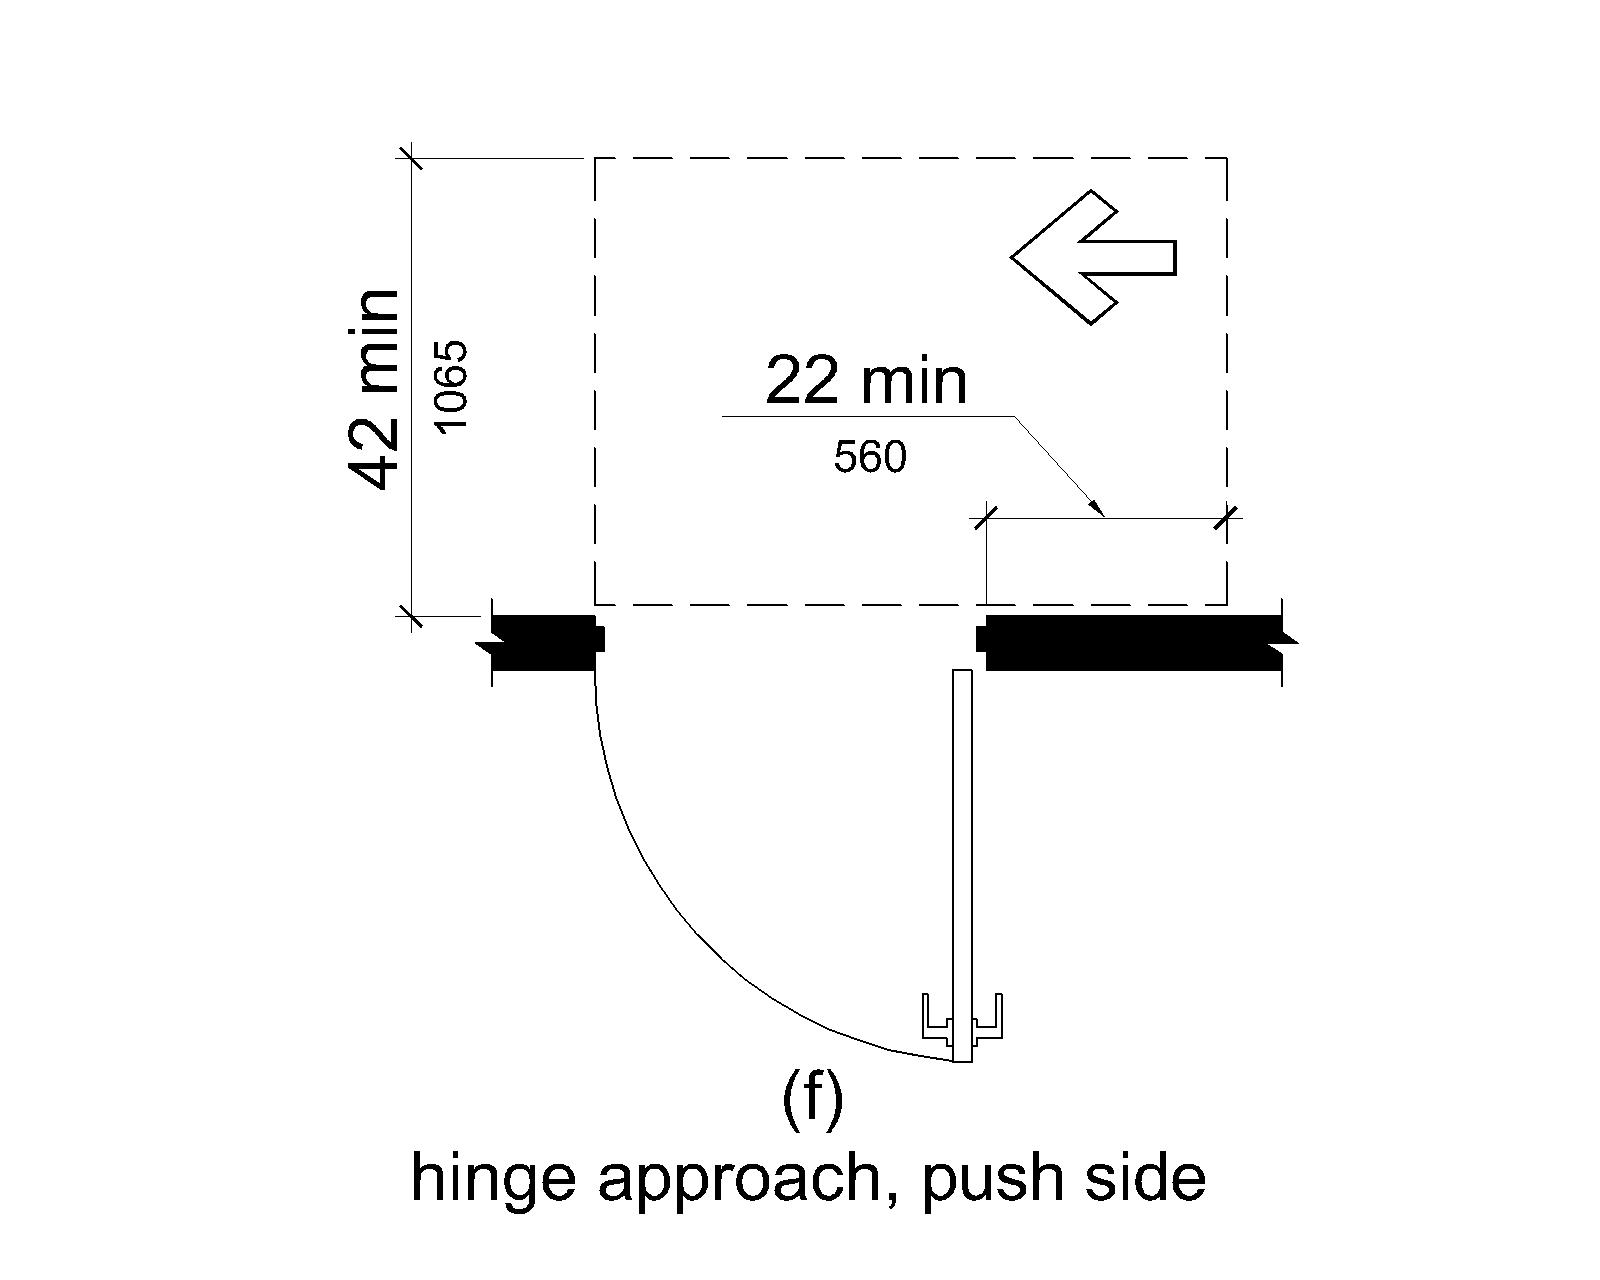 (f) On the push side, maneuvering space extends 22 inches (560 mm) from the hinge side of the doorway and 42 inches (1065 mm) at doors that do not have both a closer and a latch.